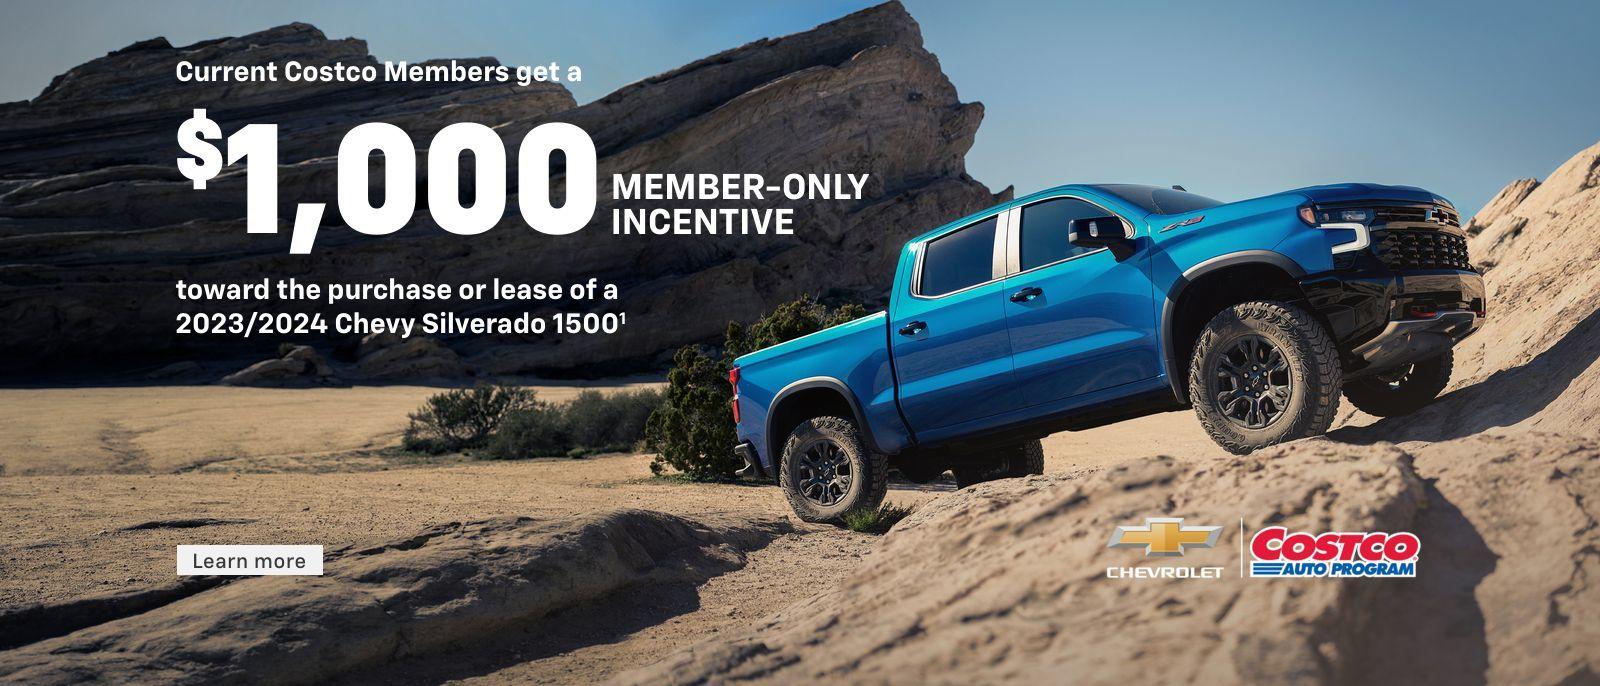 2024 Chevy Silverado 1500 Crew Cab. Accept all challenges. Current Costco members get a $1,000 member-only incentive toward the purchase or lease of a 2024 Silverado 1500 Crew Cab.